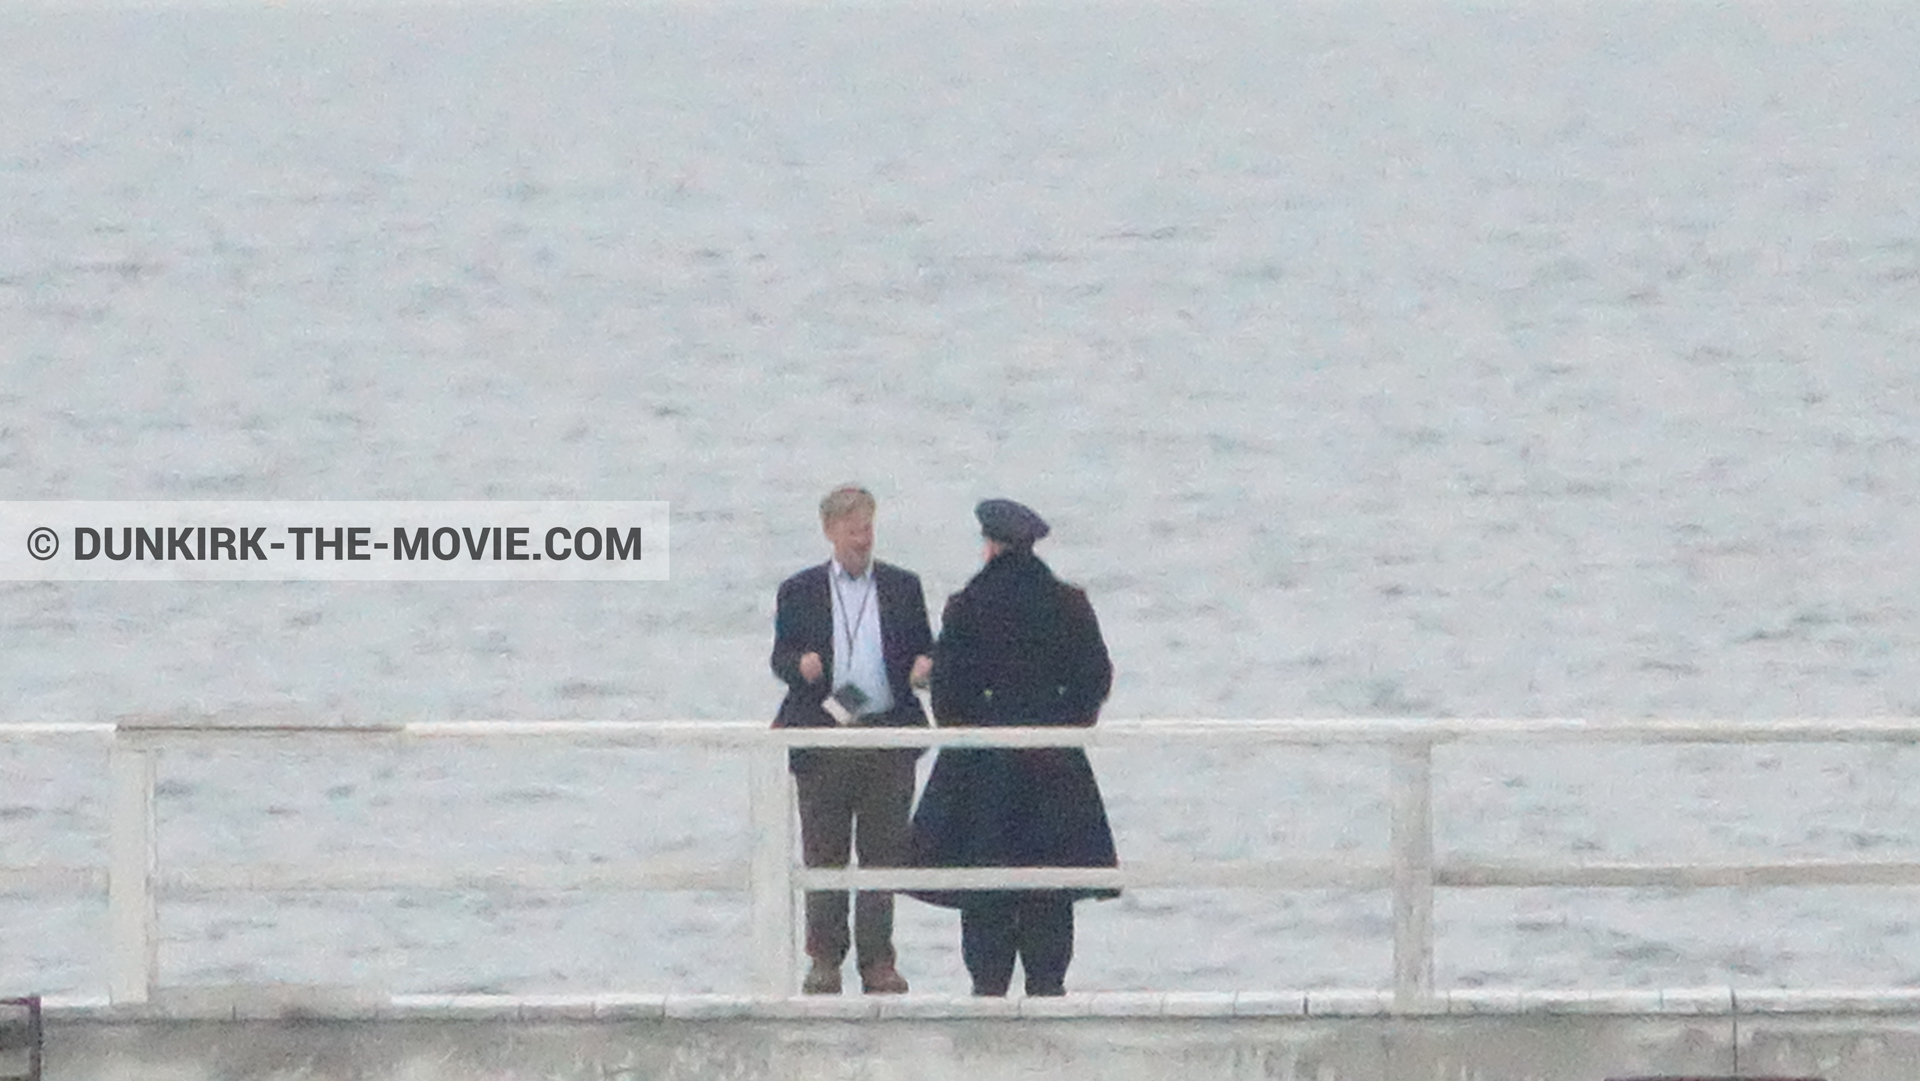 Picture with EST pier, Kenneth Branagh, Christopher Nolan,  from behind the scene of the Dunkirk movie by Nolan